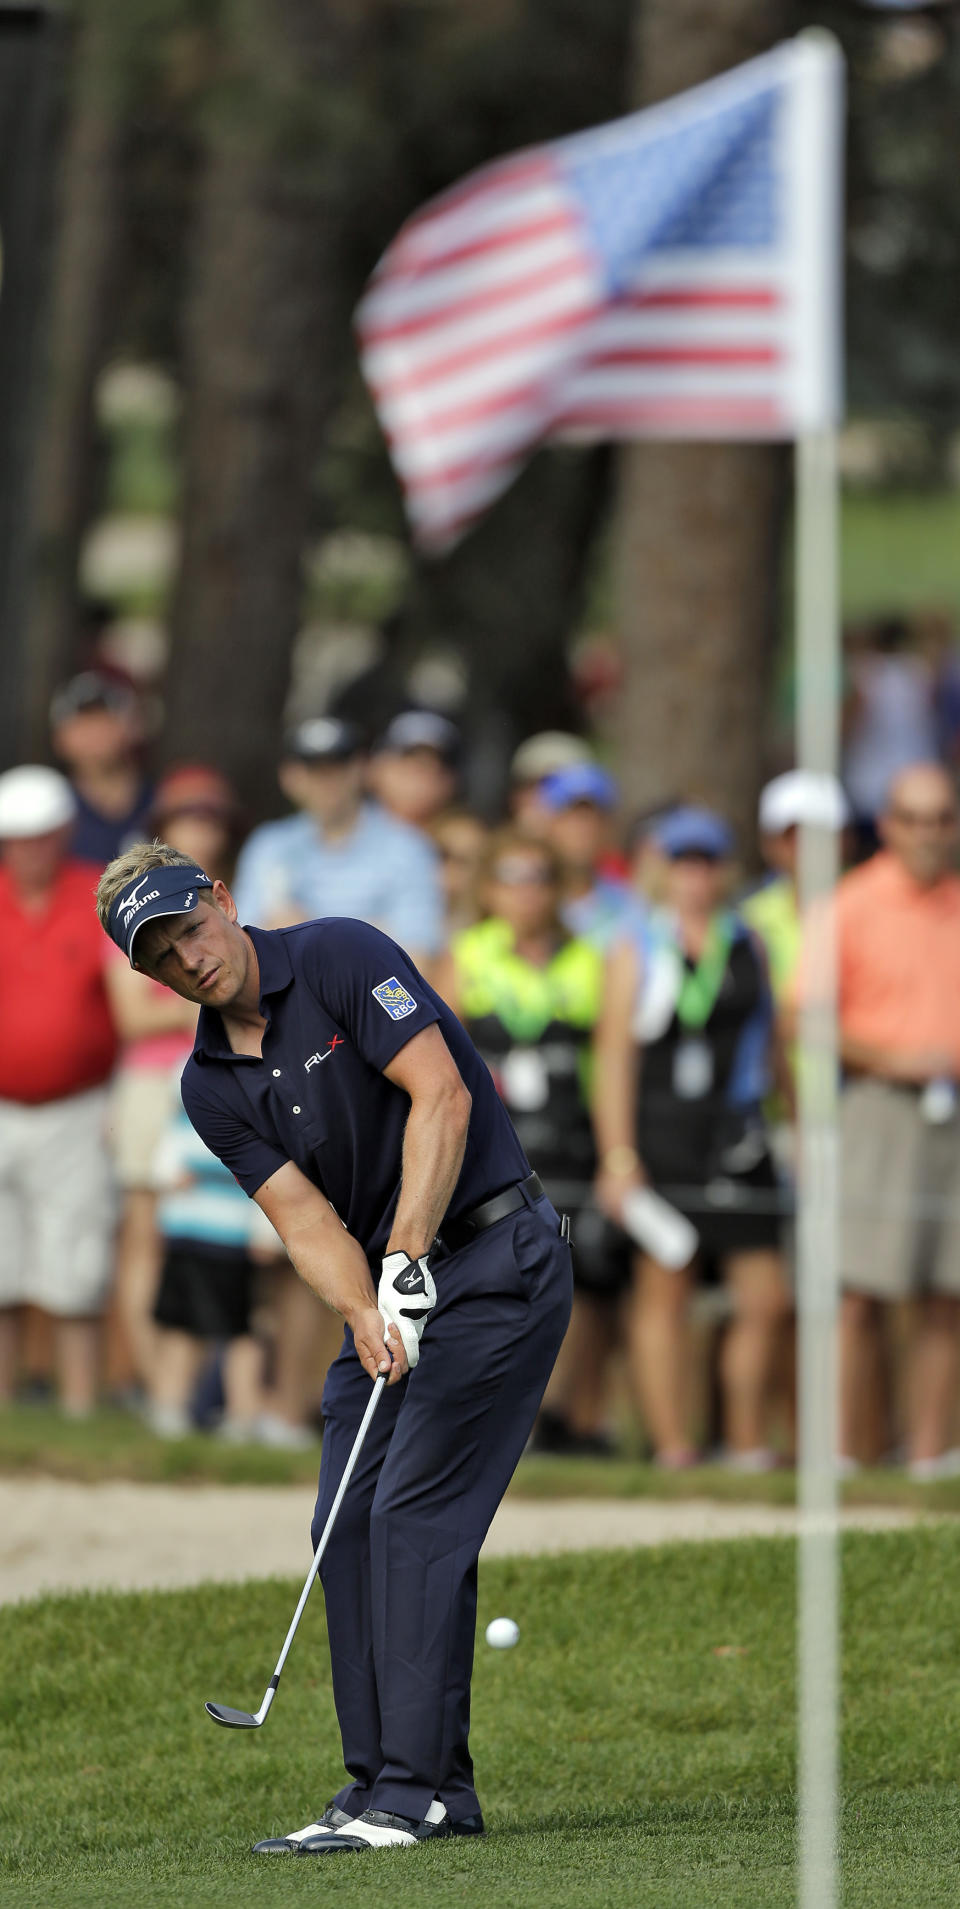 Luke Donald, of England, chips onto the 16th green during the final round of the Valspar Championship golf tournament at Innisbrook, Sunday, March 16, 2014, in Palm Harbor, Fla. Donald finished tied for fourth. (AP Photo/Chris O'Meara)